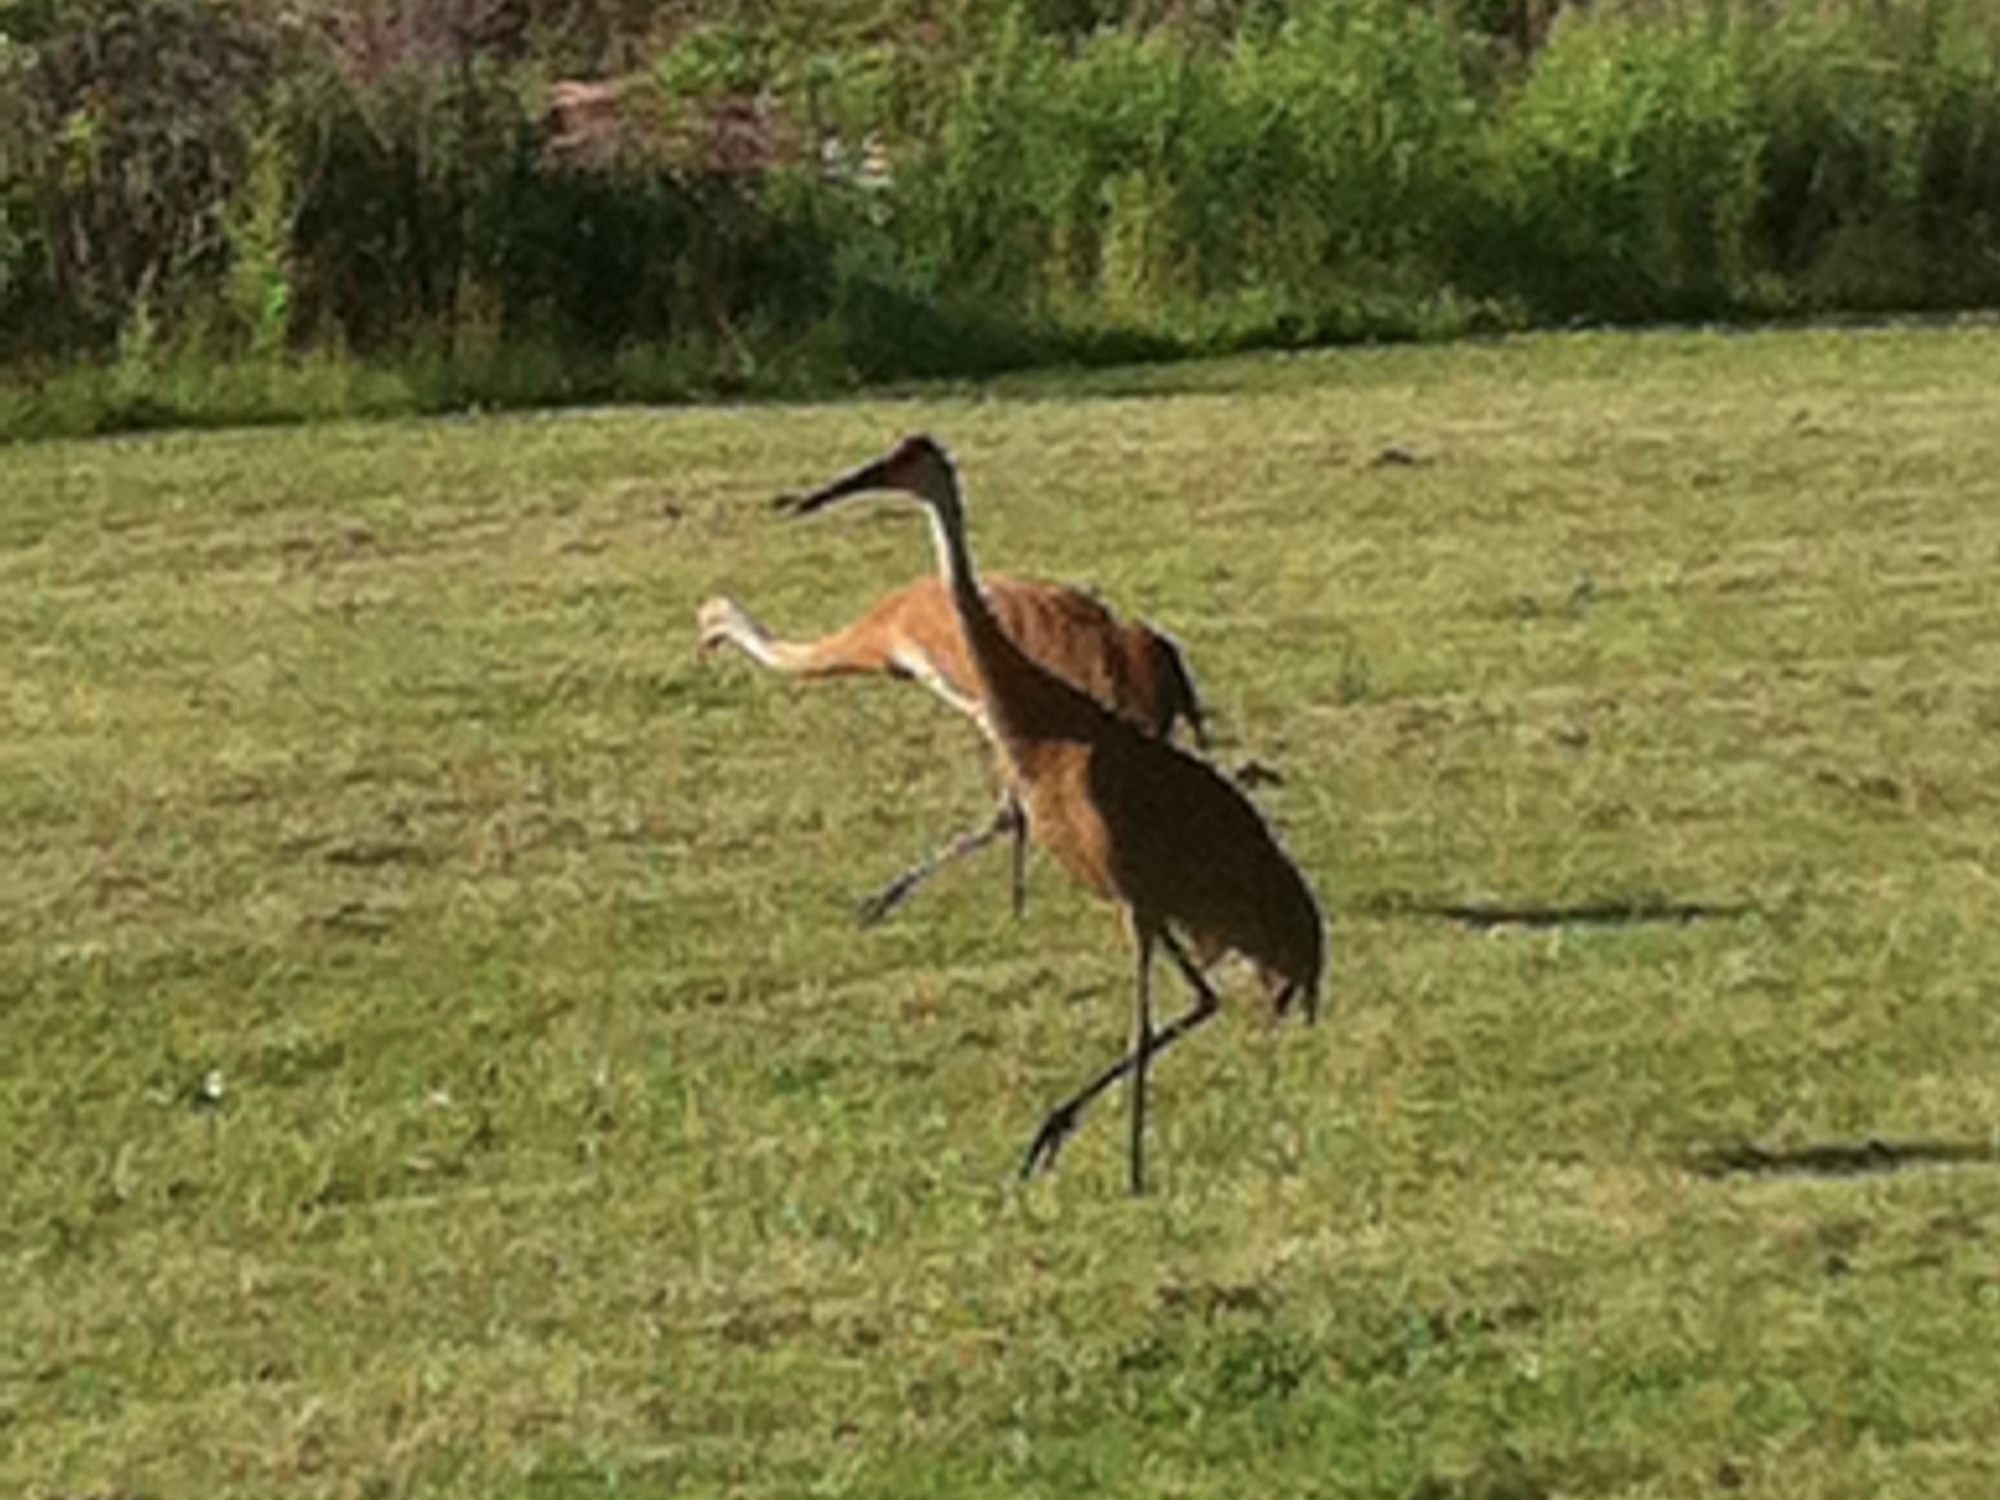 Sandhill Cranes at Marion-Dunn retention pond and prairie on June 17, 2016.